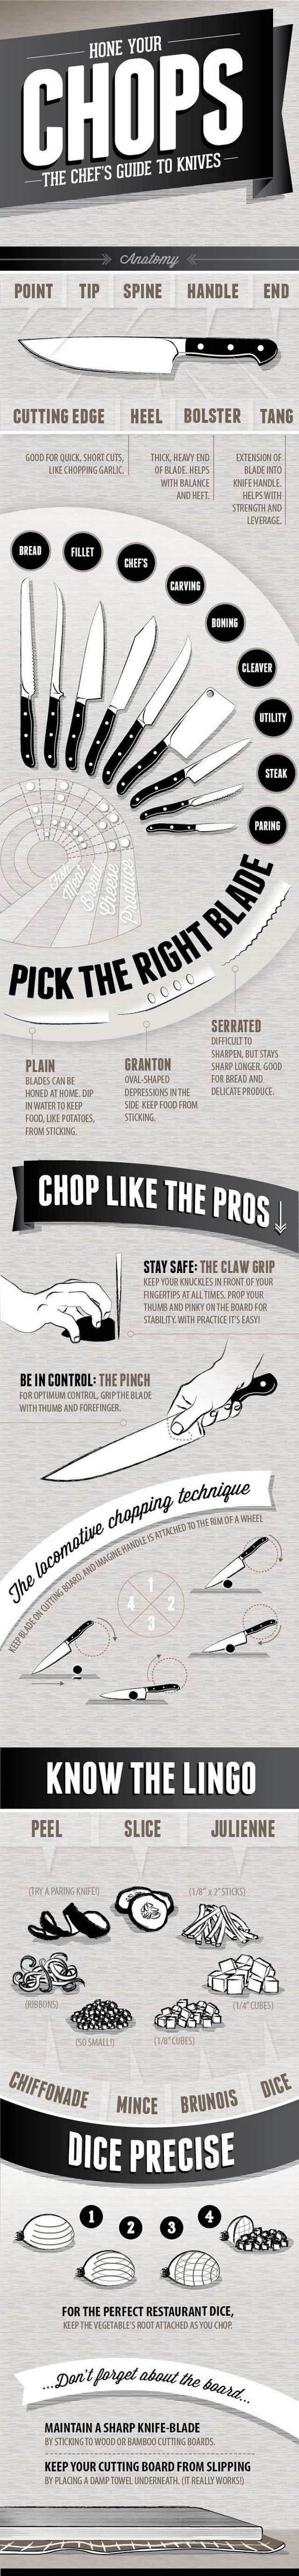 Great Advice: The Chef's Guide to Knives.